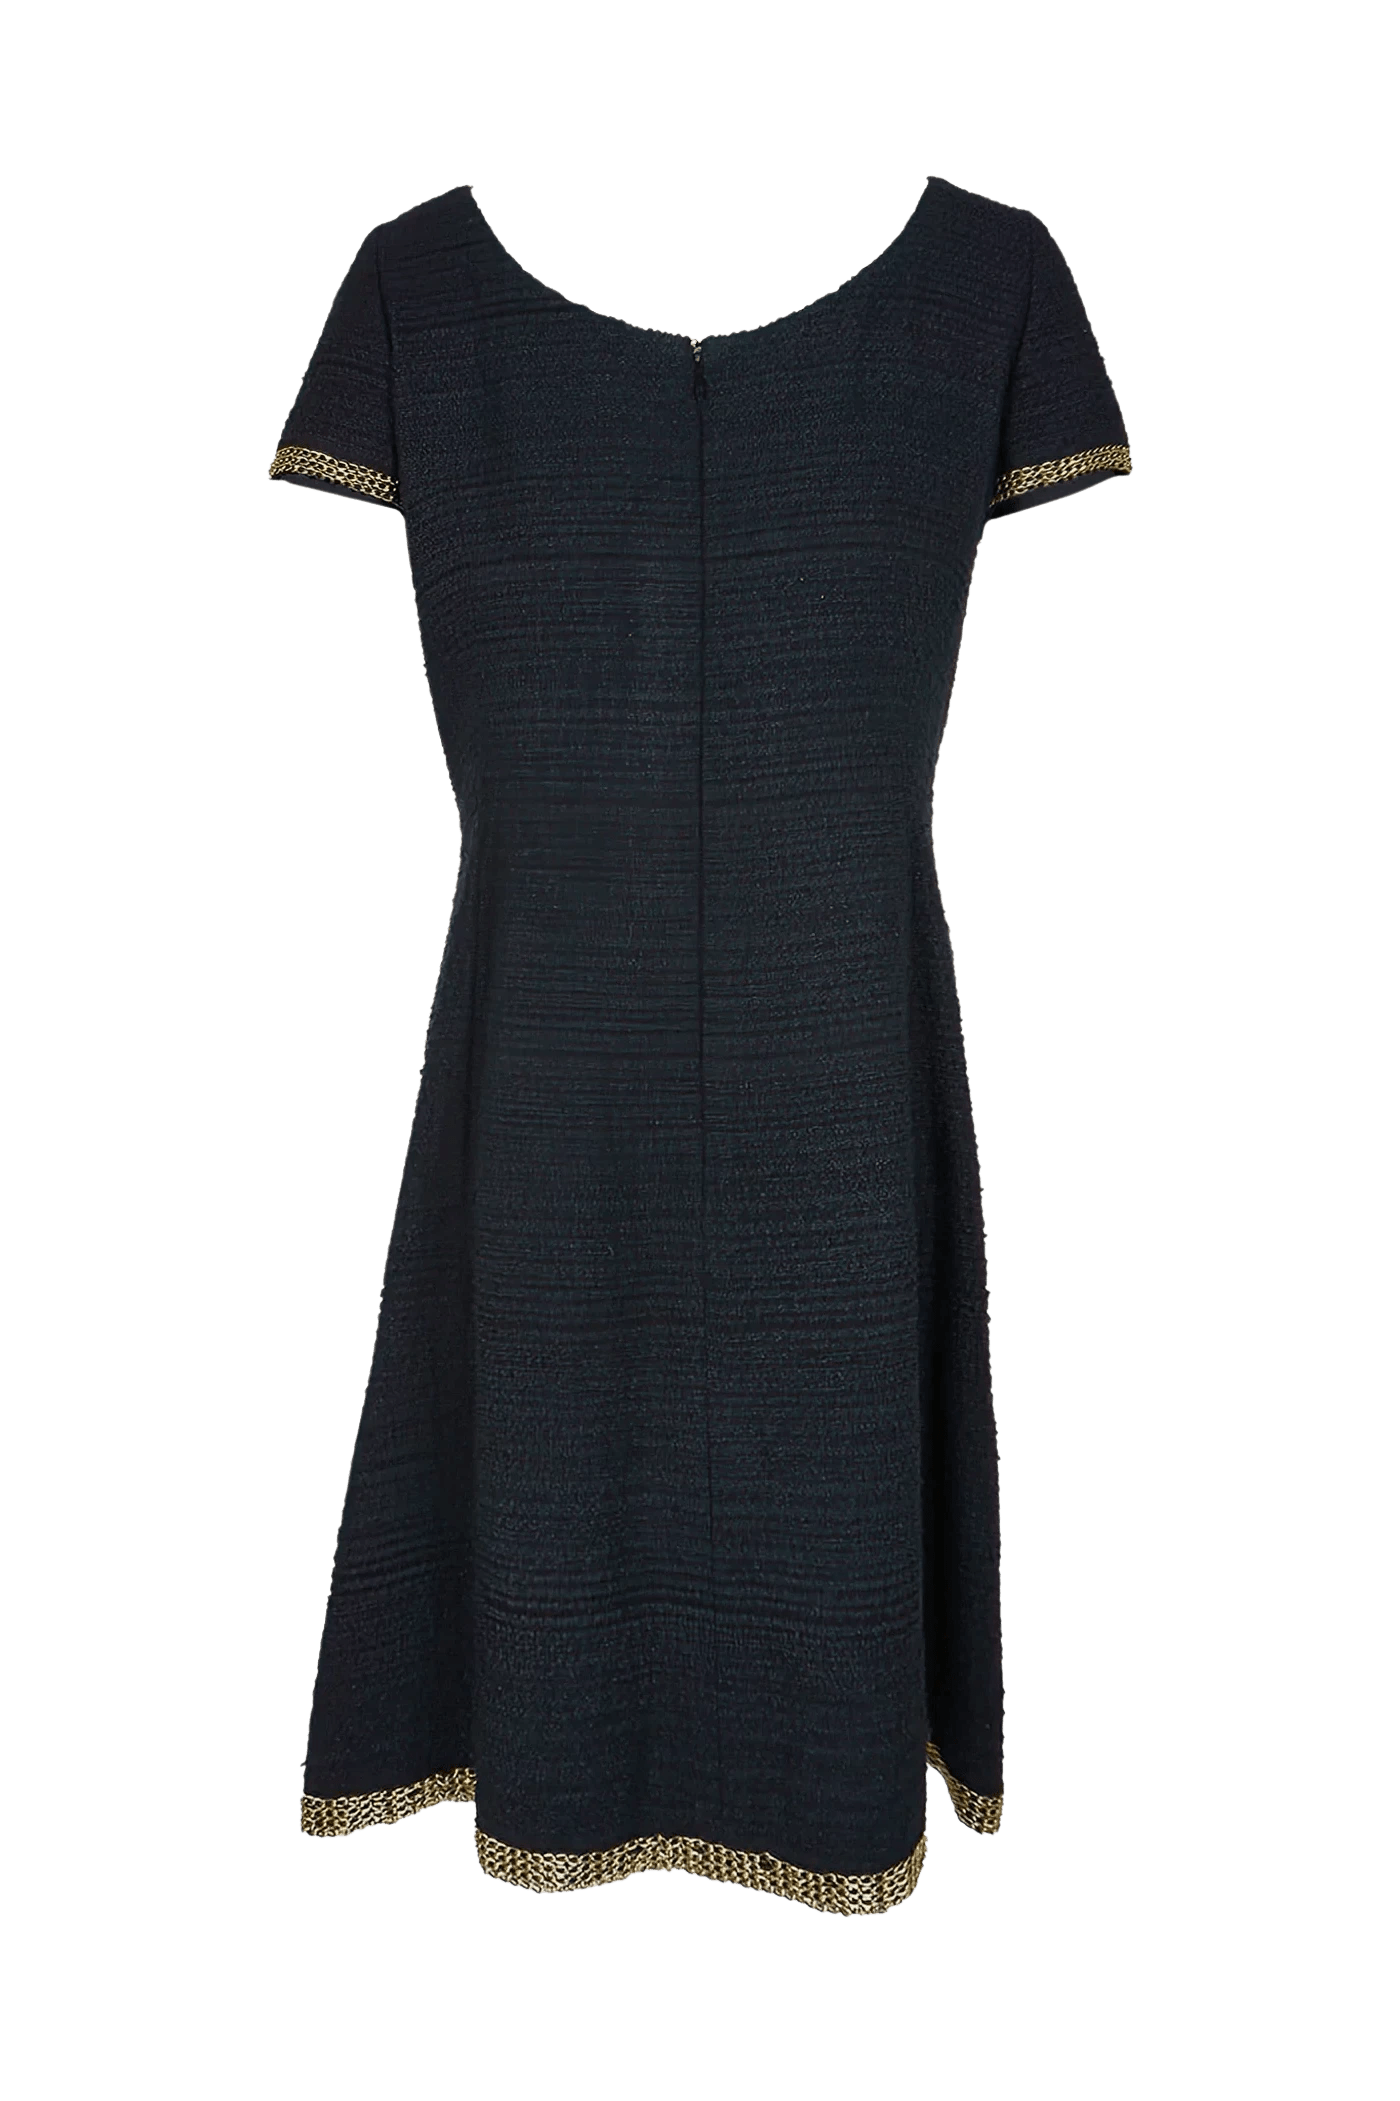 Chanel 2008 Chain Tweed Dress - Foxy Couture Carmel